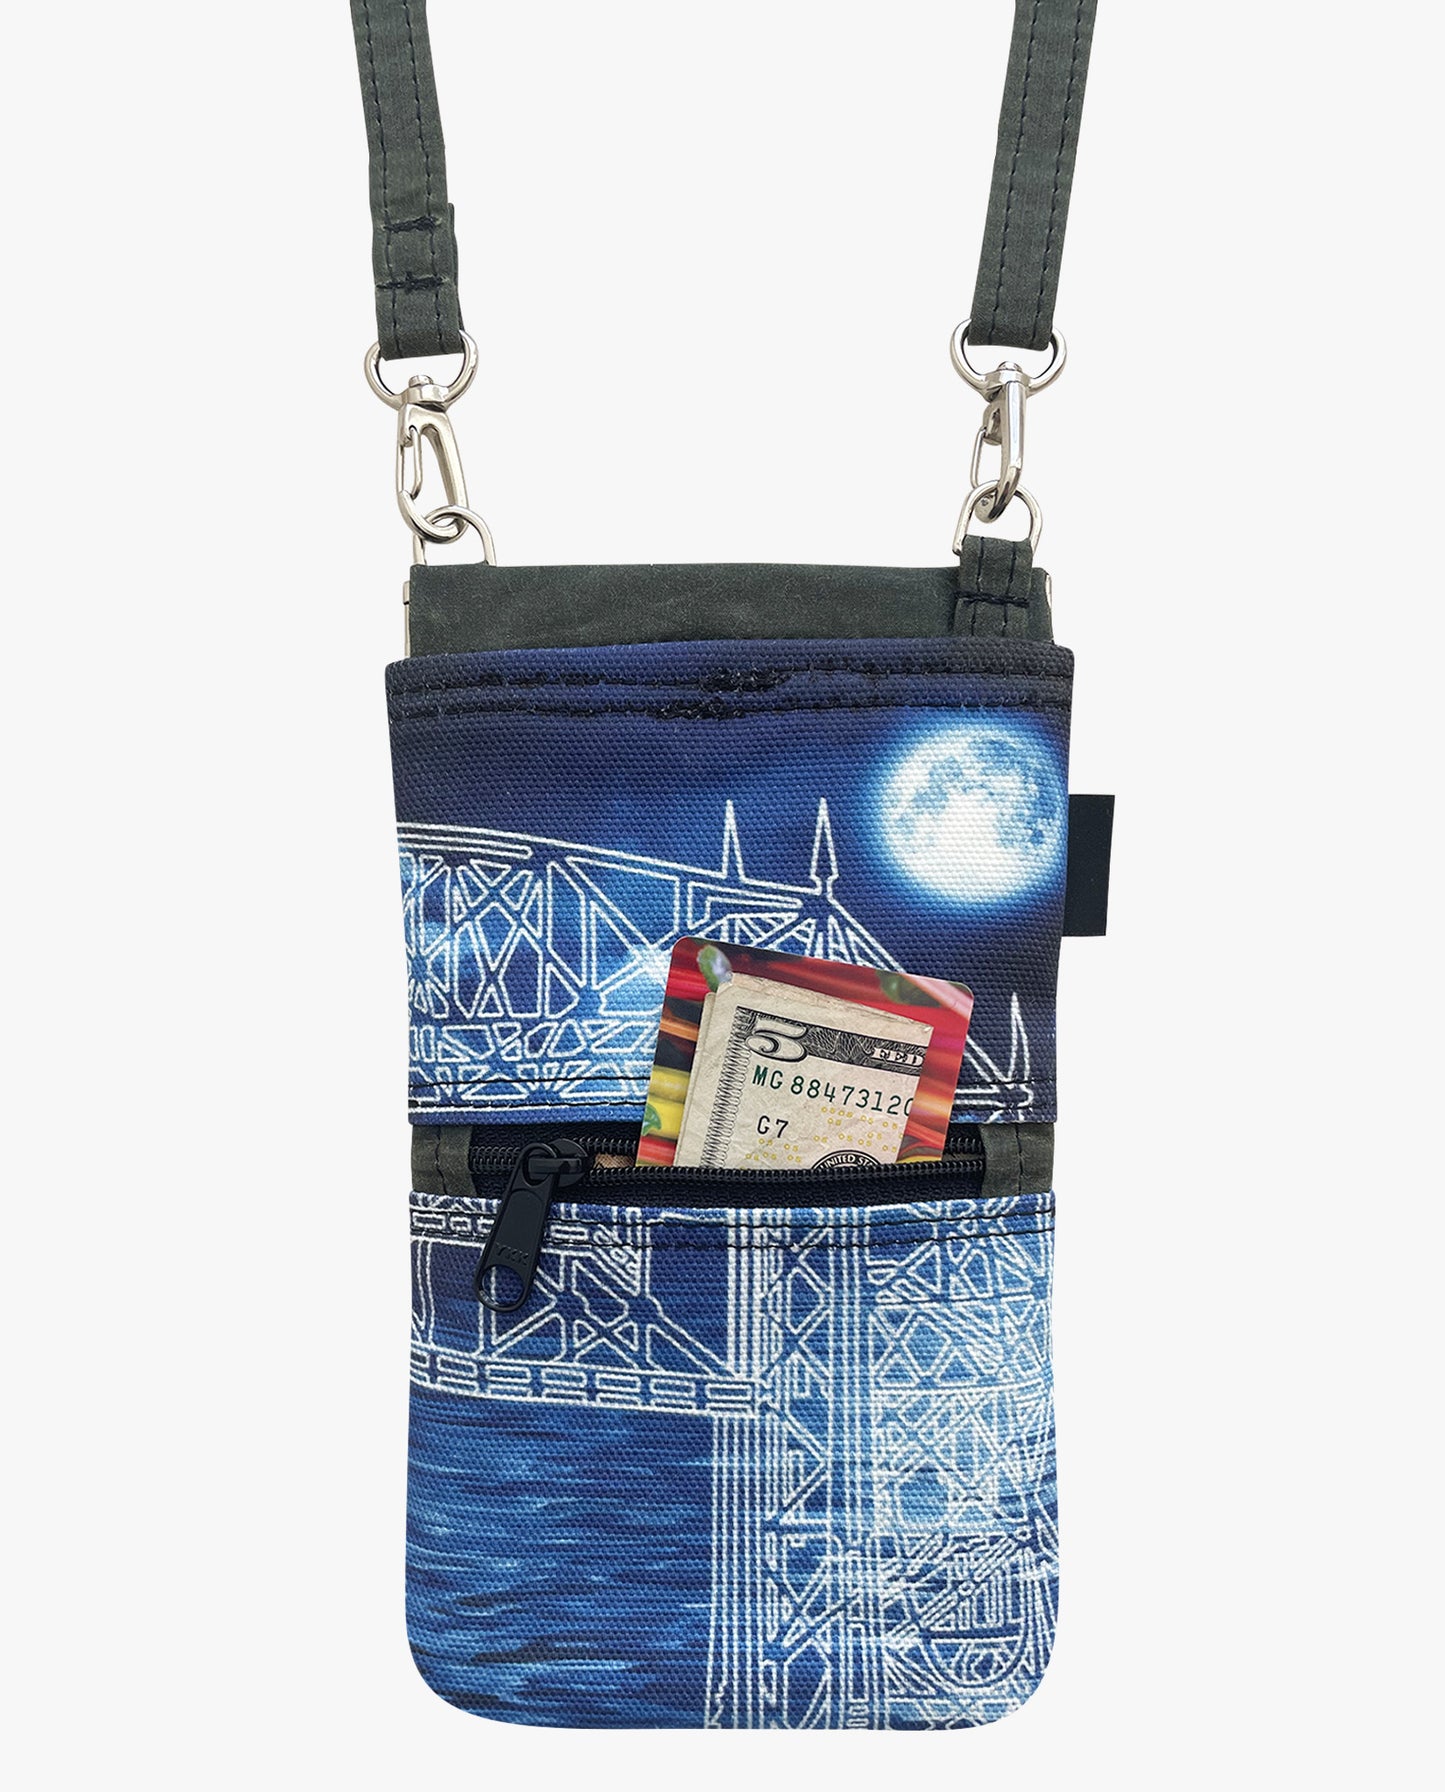 Lift Bridge cell phone bag back view by Dock 5 Duluth